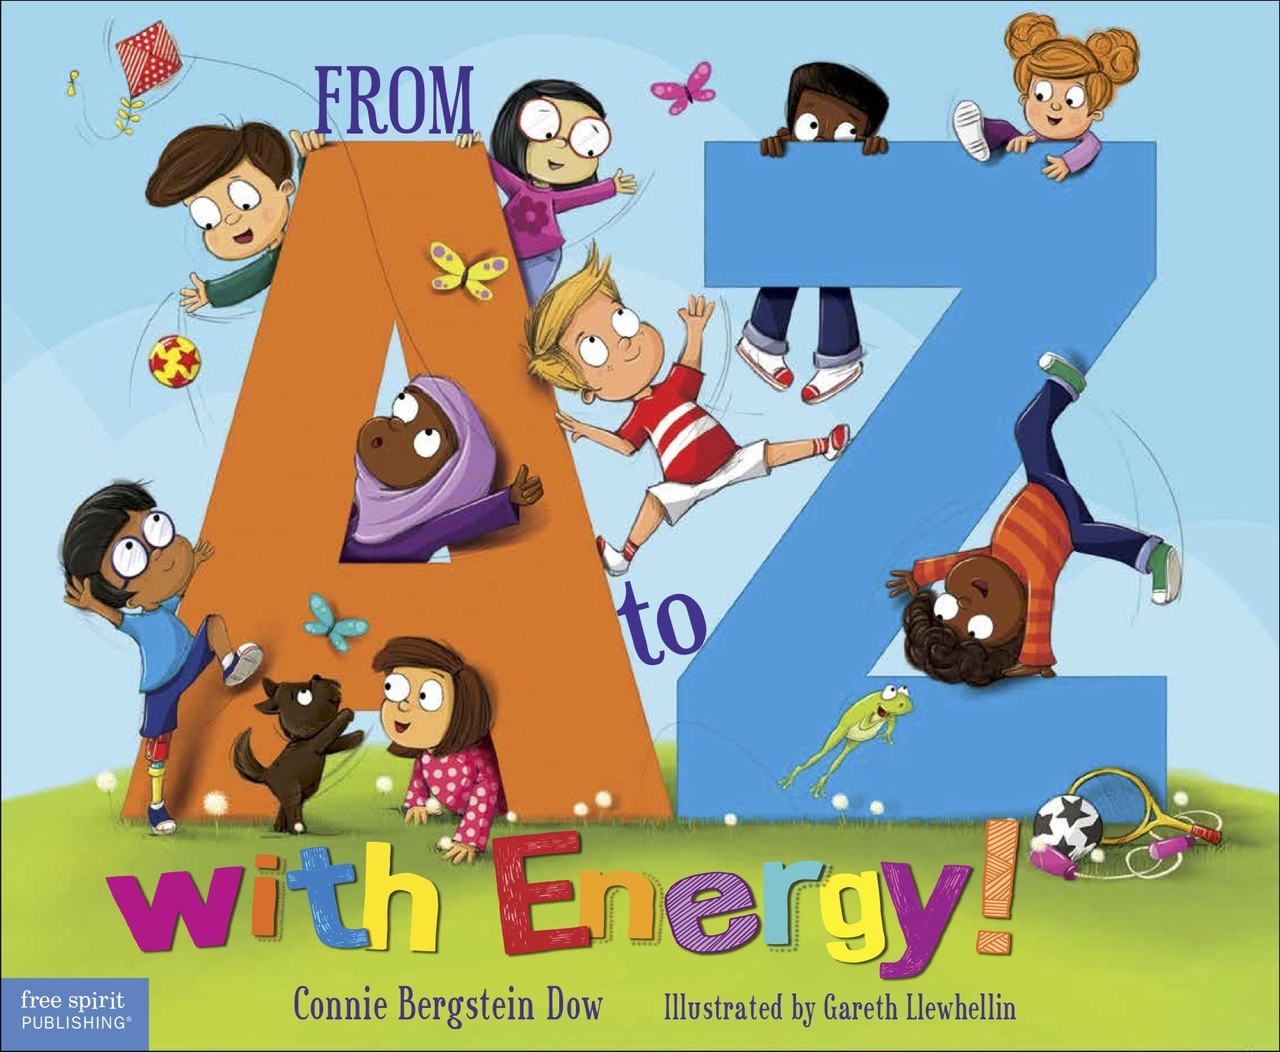 FROM A TO Z WITH ENERGY!